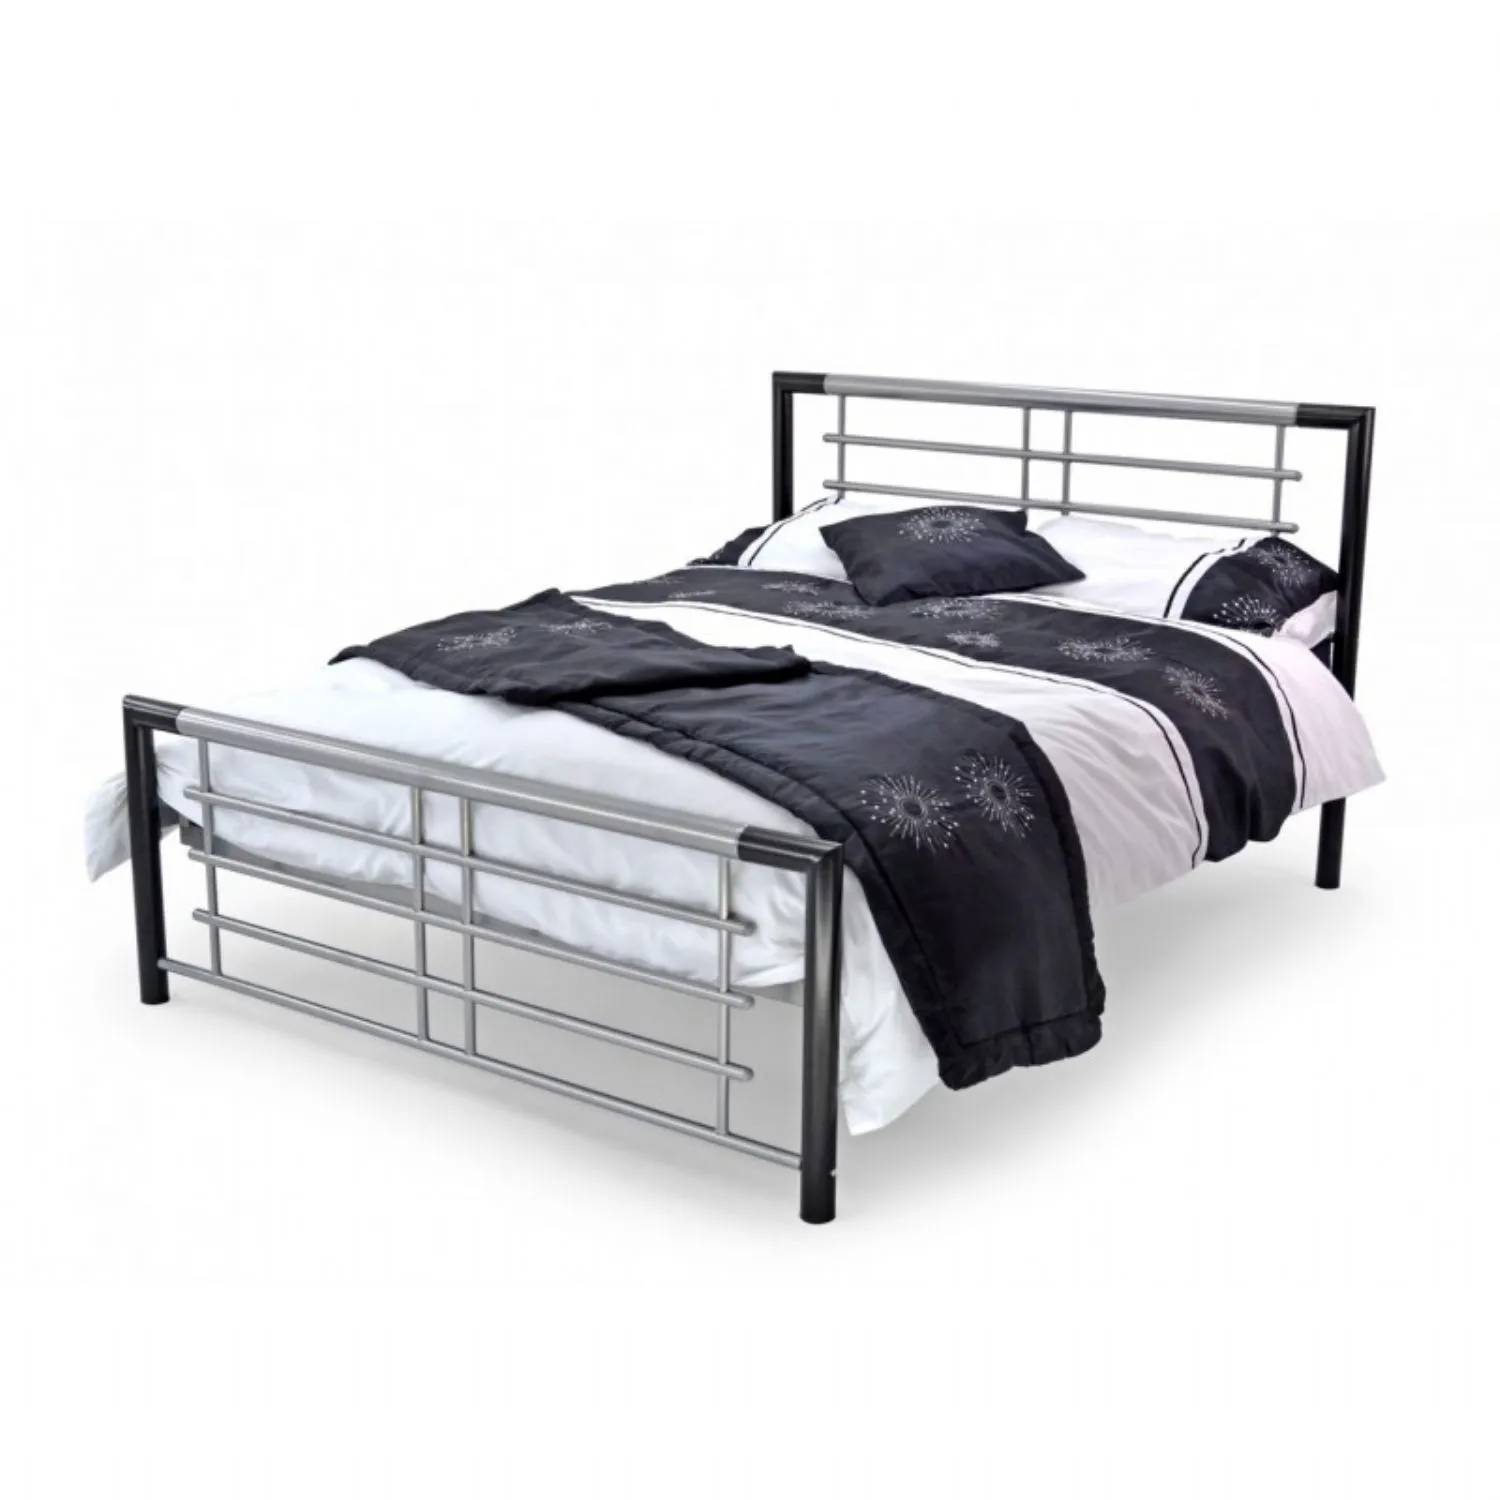 Black and Silver Mesh Based Metal Bed 4ft 6 Double